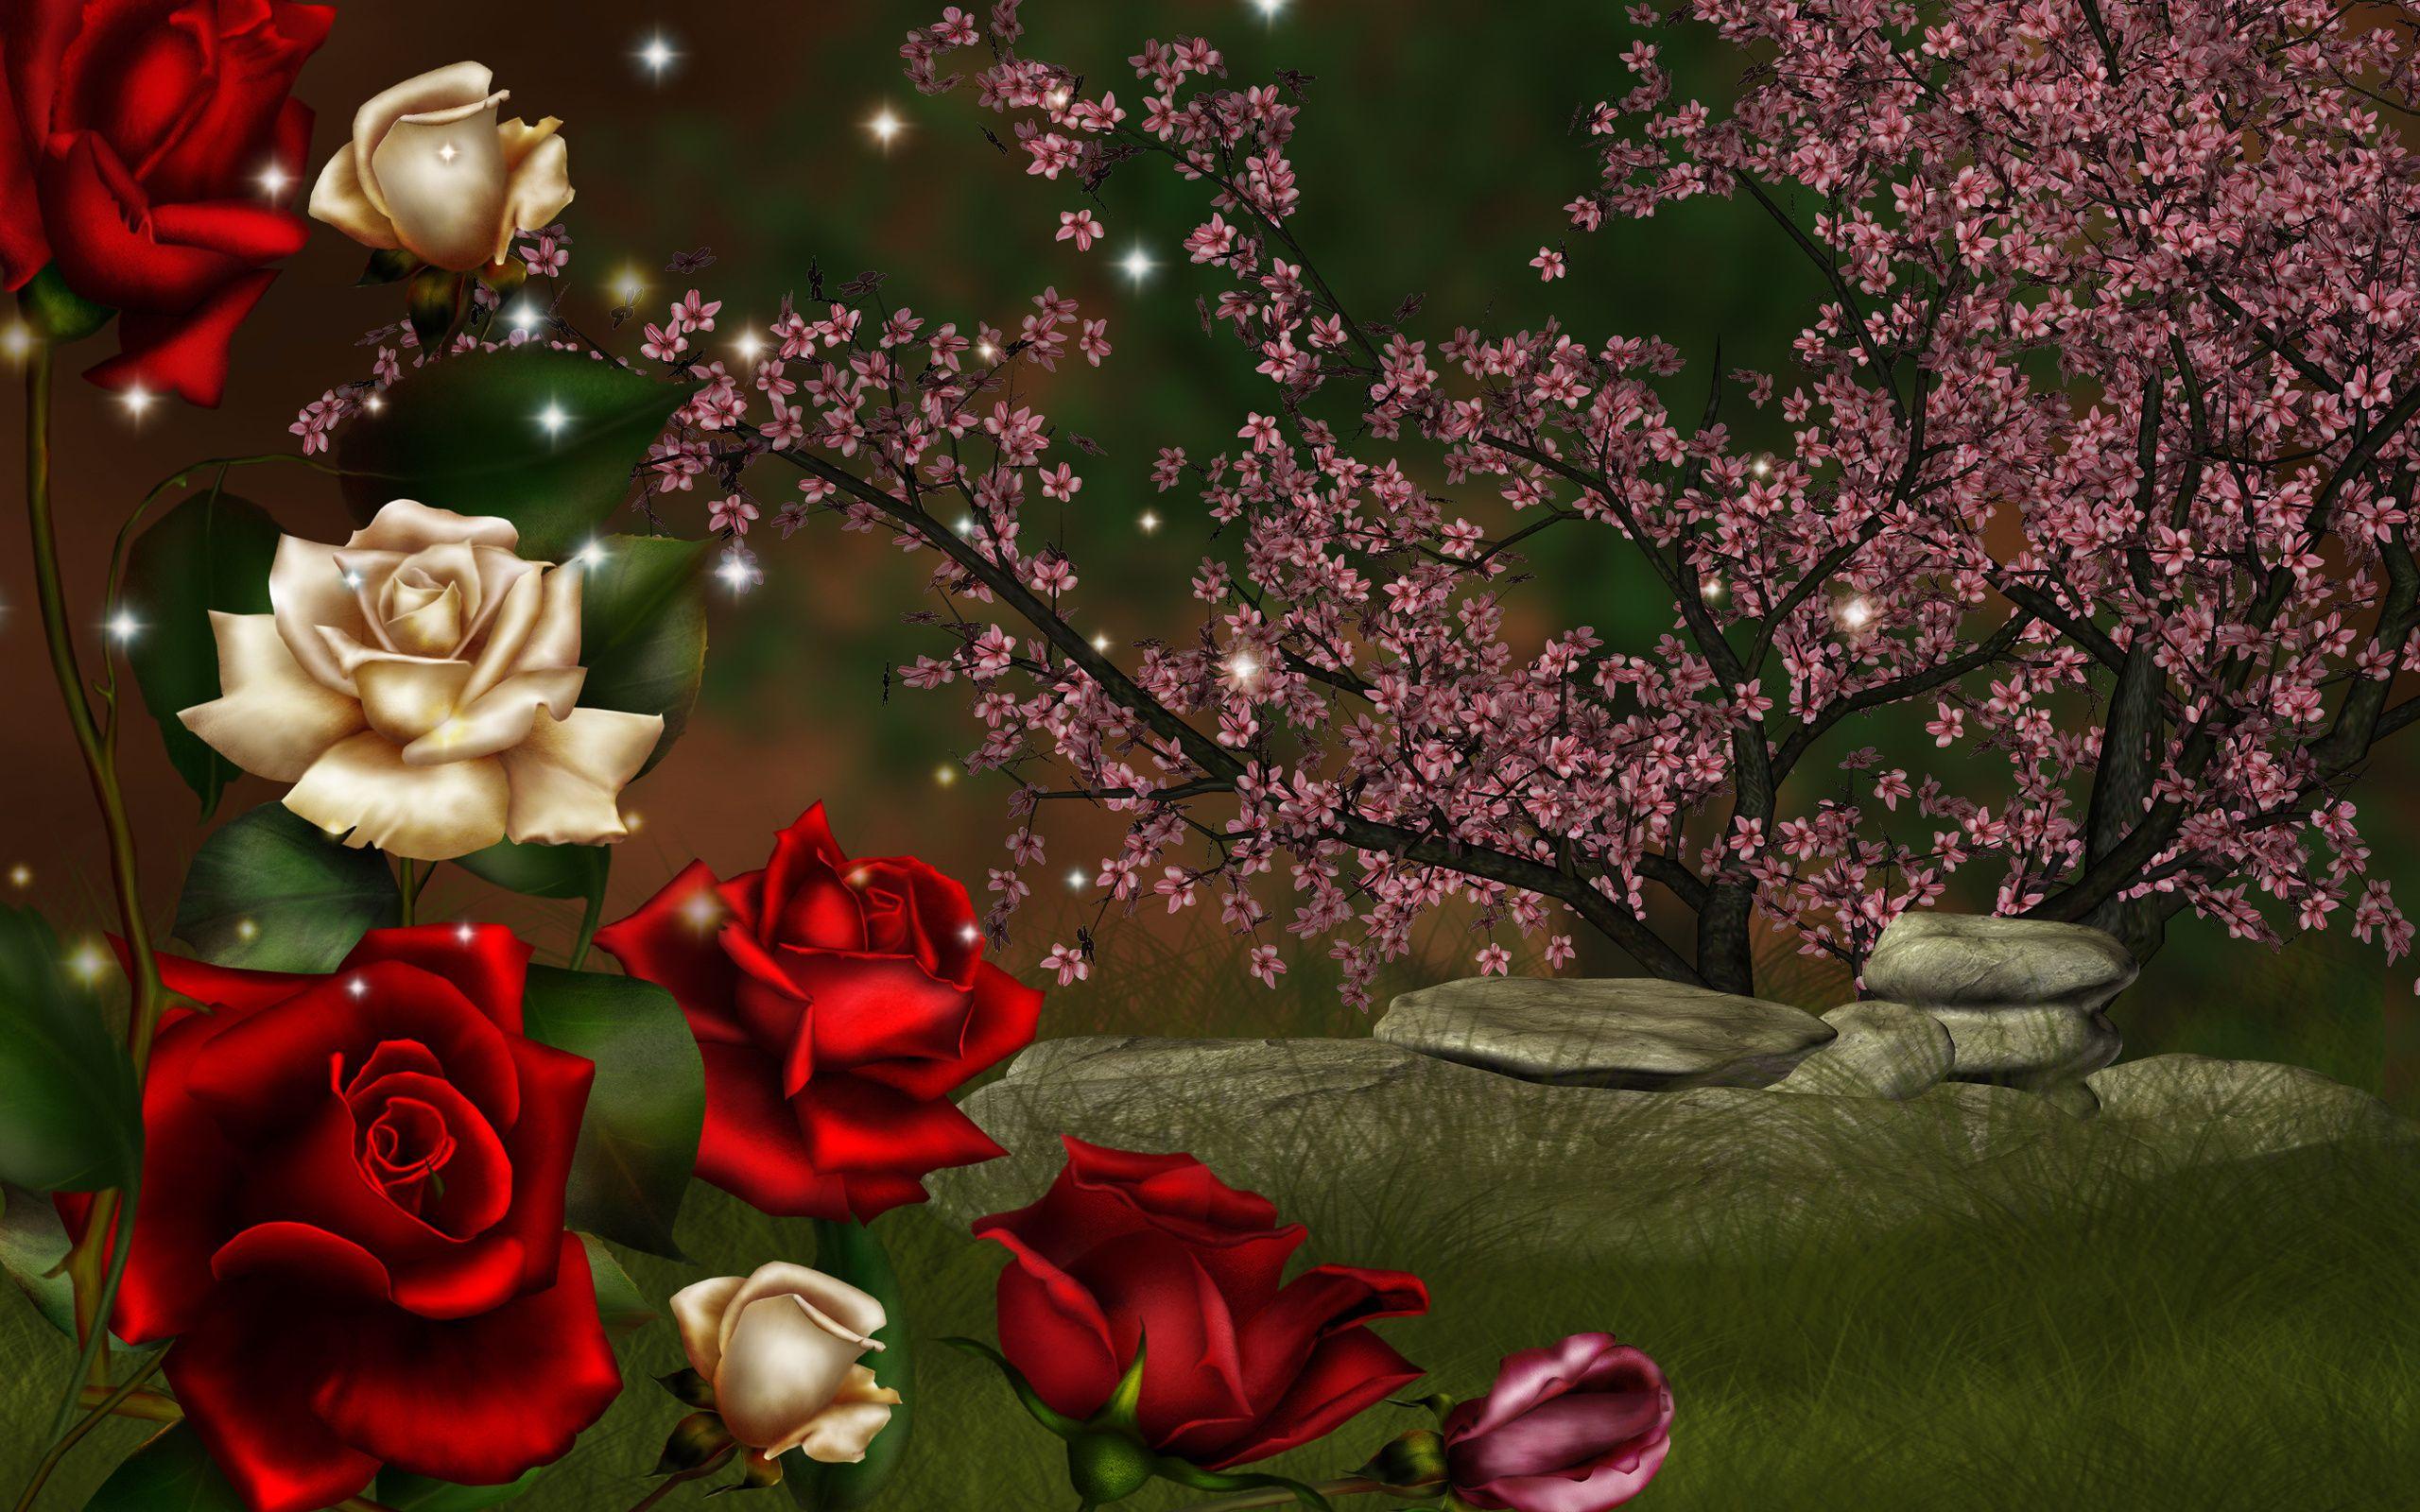 Red Roses Art Wallpapers - Top Free Red Roses Art Backgrounds